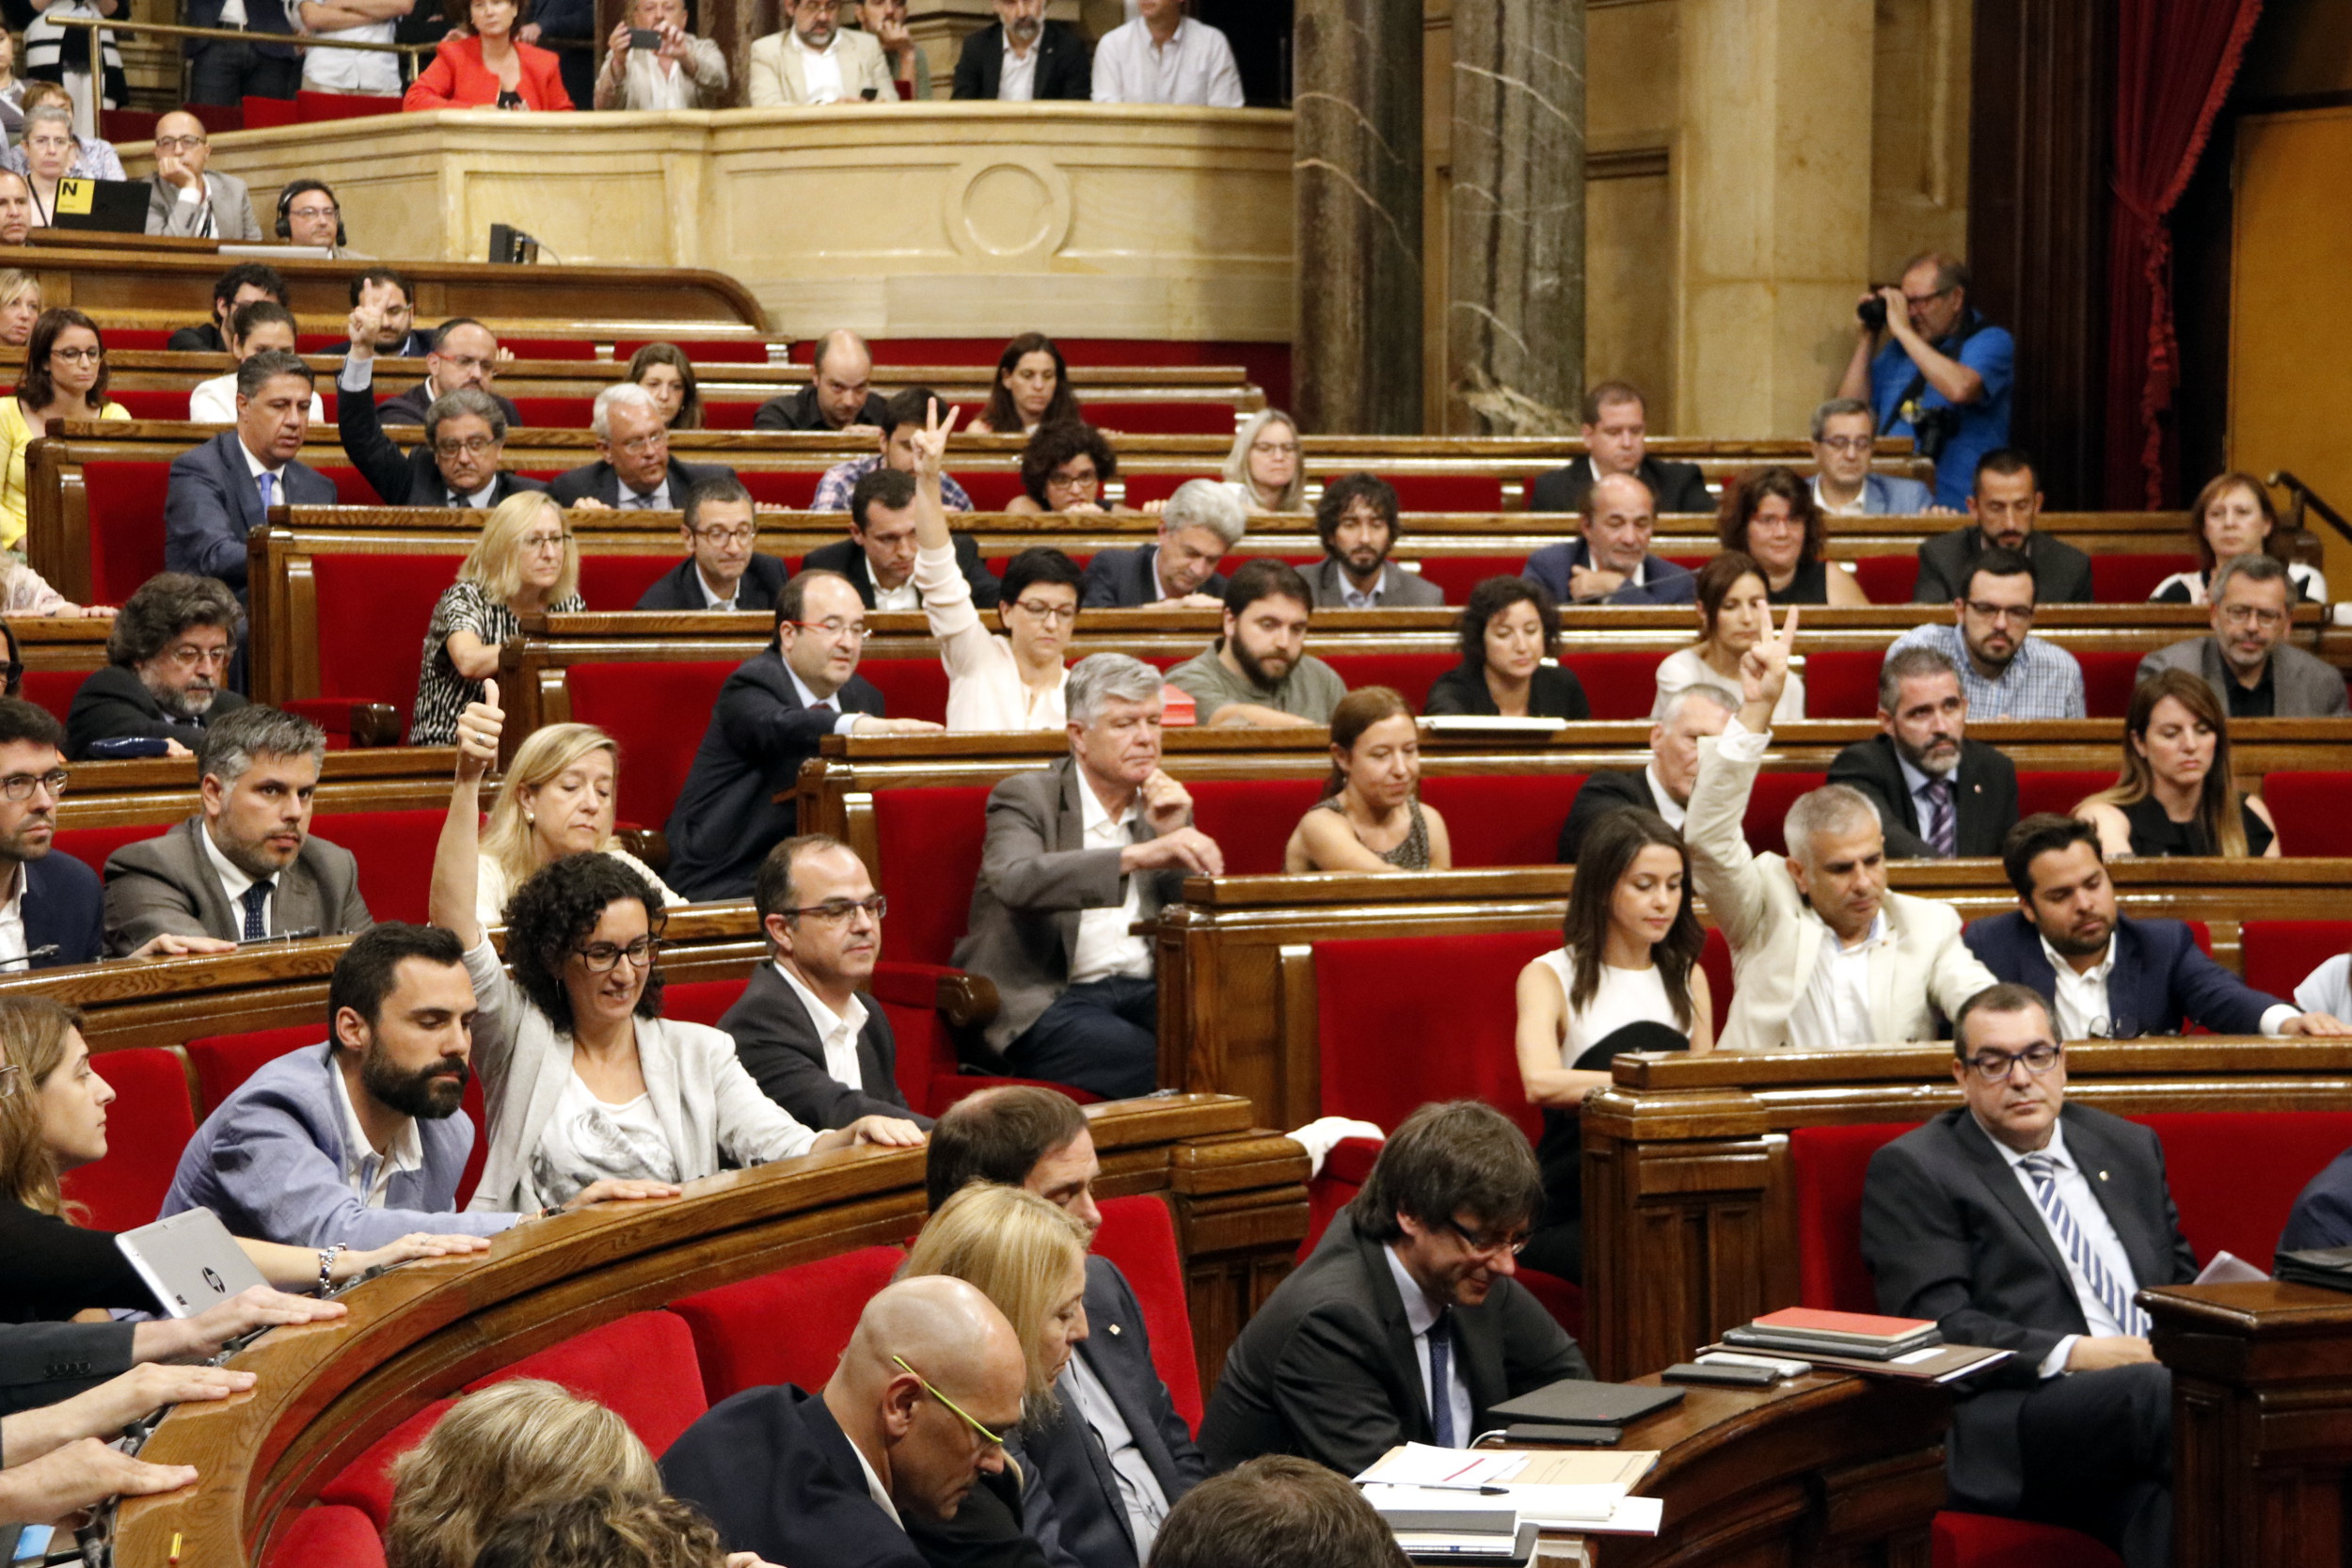 MPs voting in the Parliament's session the conclusions of the Committee to Study the Constitutive Process